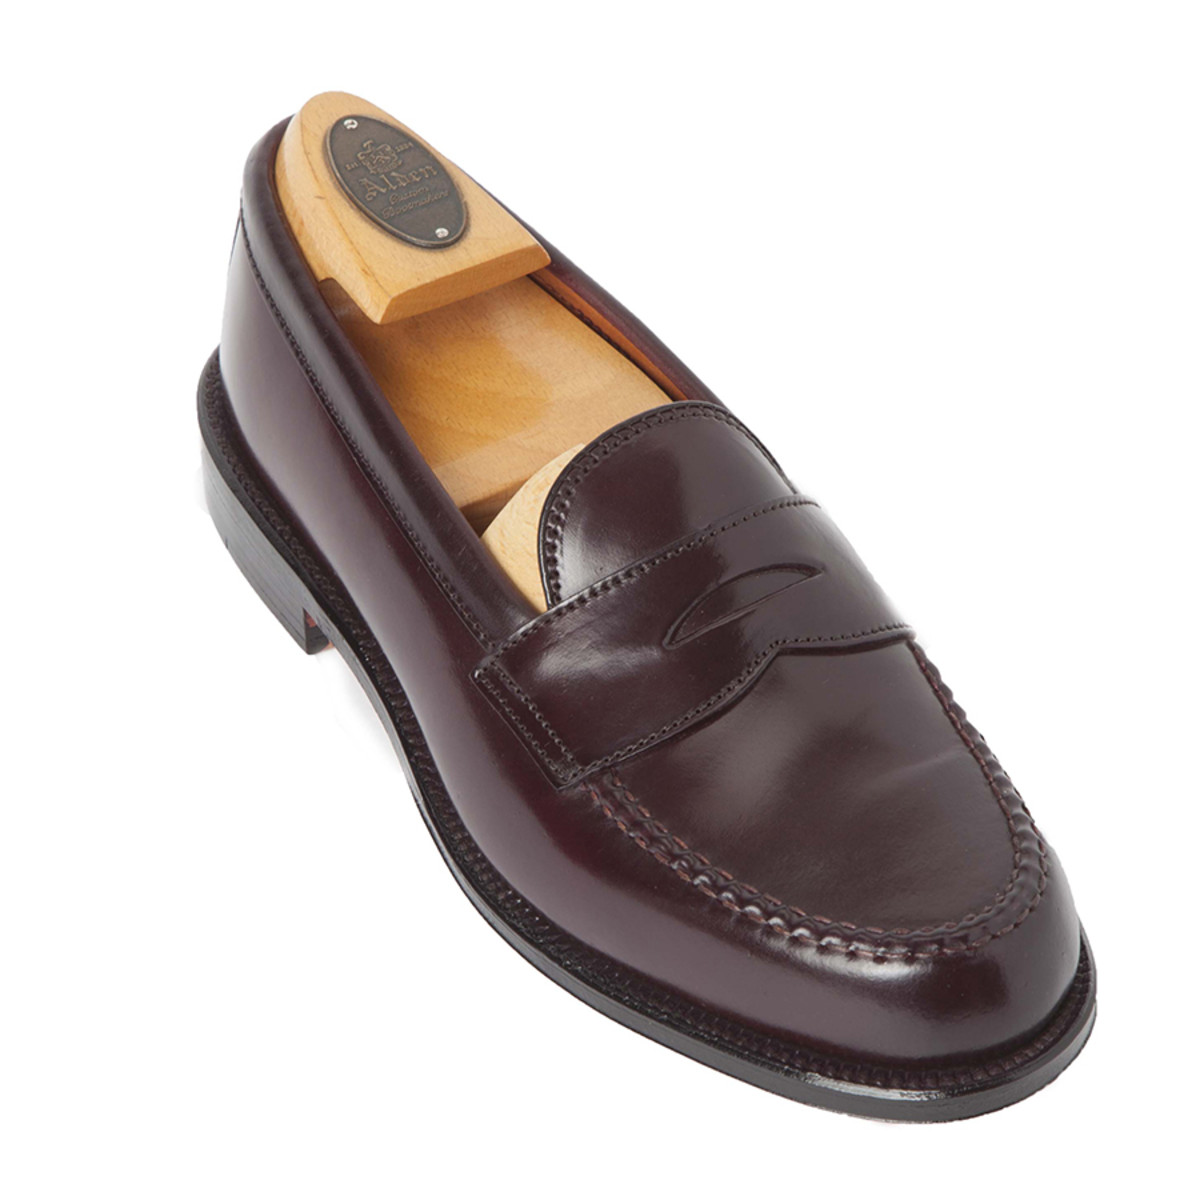 11 Men's Burgundy Penny Loafers at Every Price Point - Men's Journal